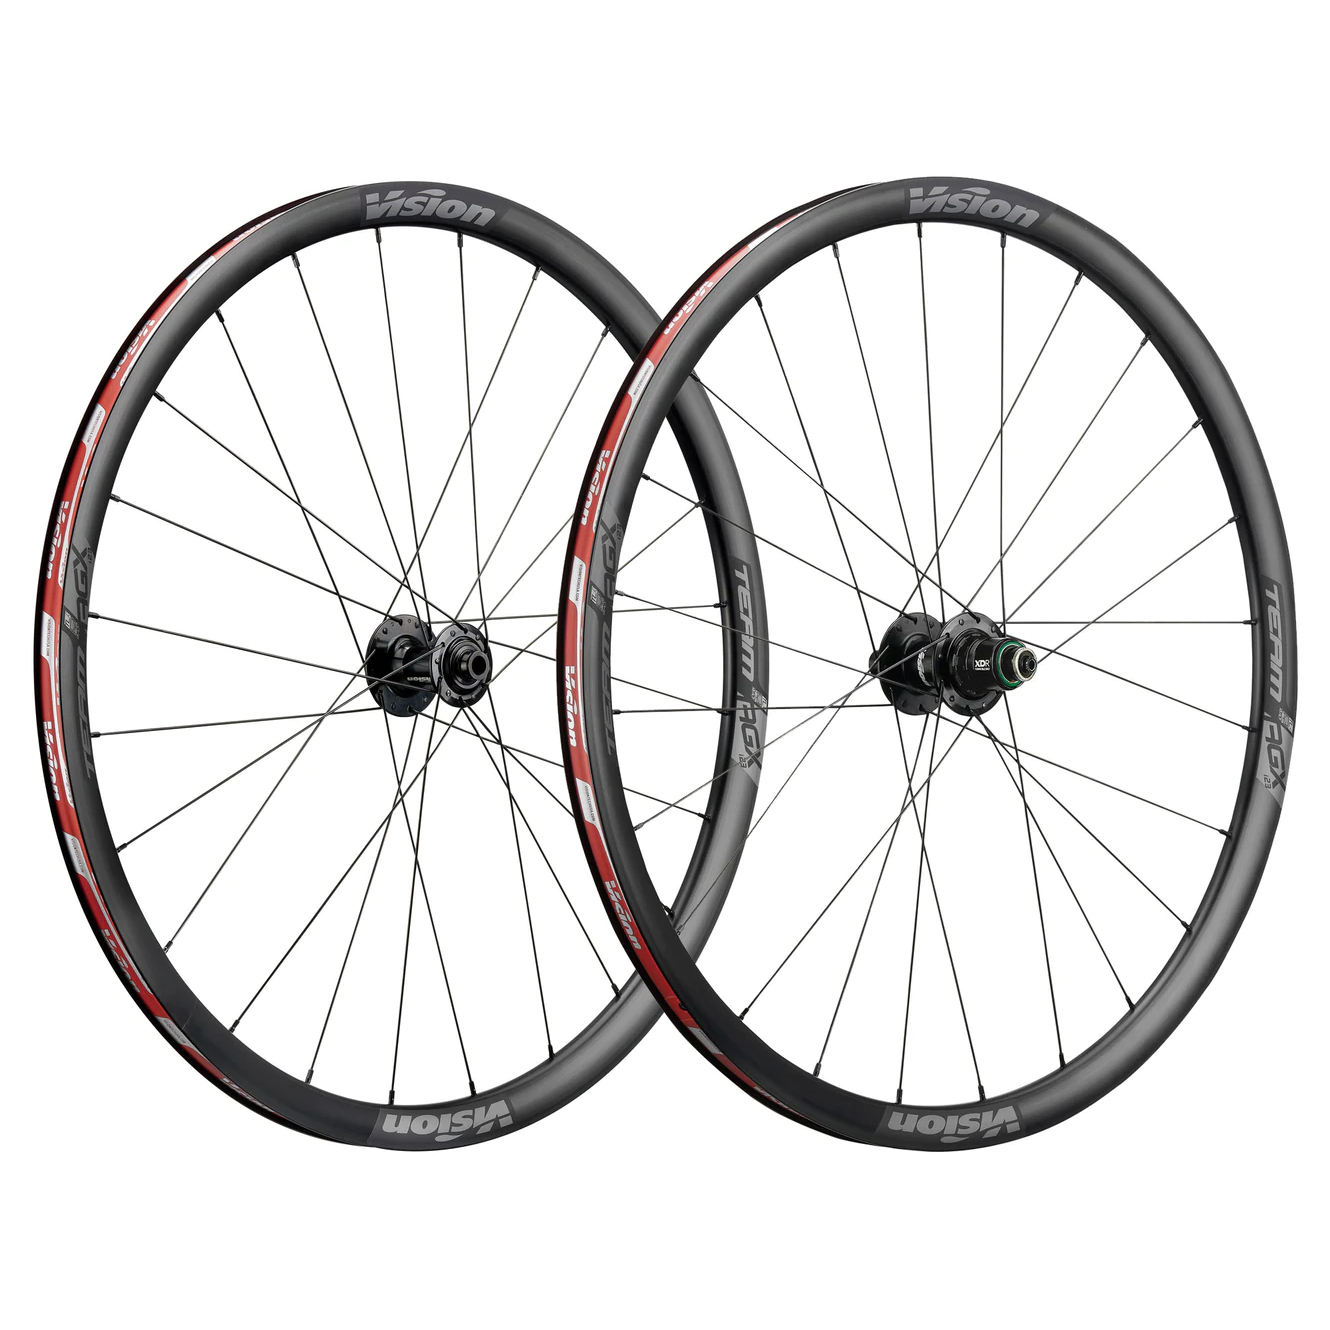 Picture of Vision Team AGX i23 Wheelset - TLR | Centerlock - 12x100mm | 12x142mm - SRAM XDR